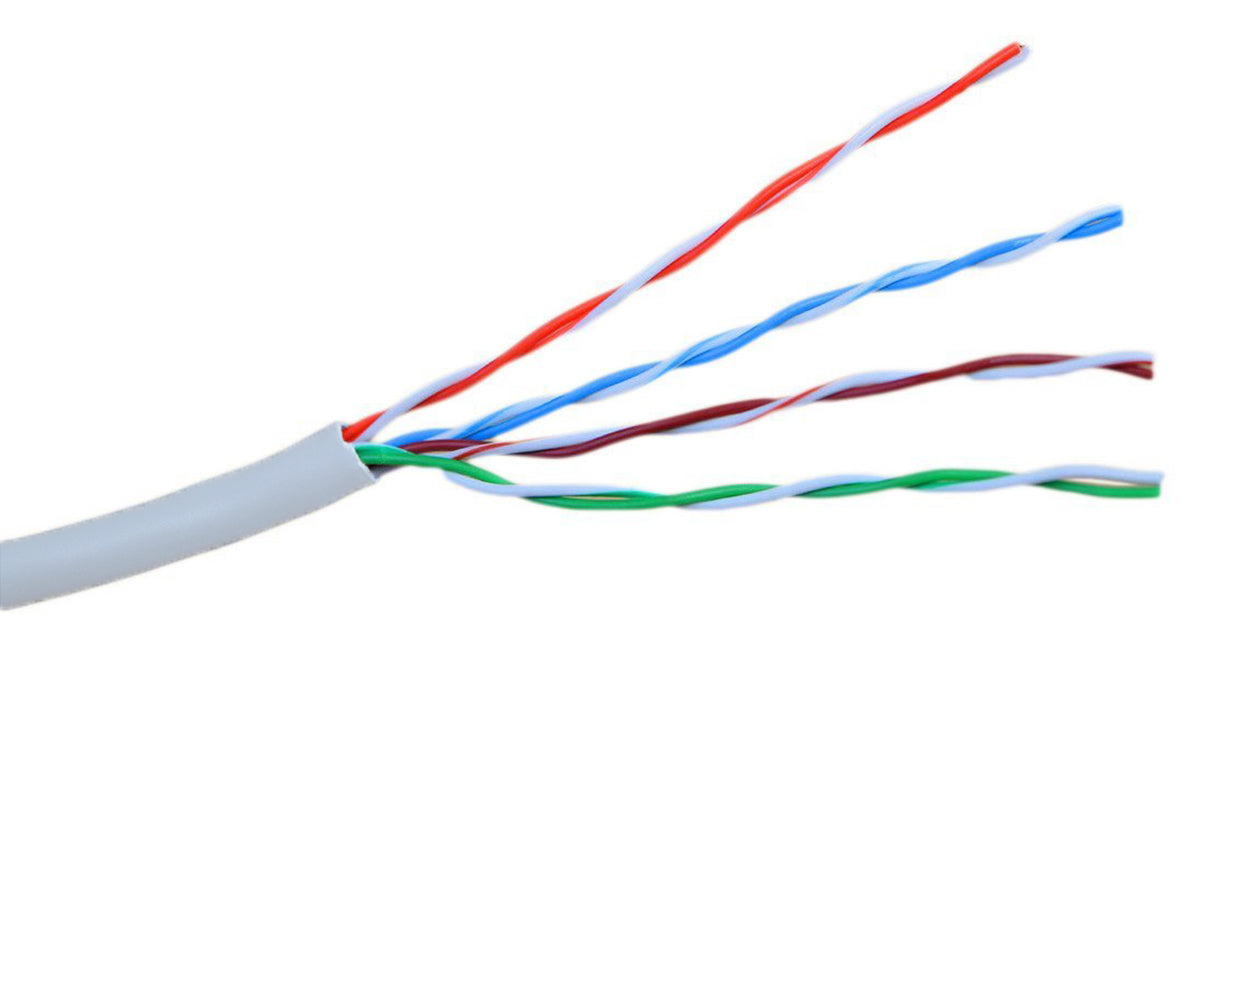  250ft Cat5e Ethernet Cable